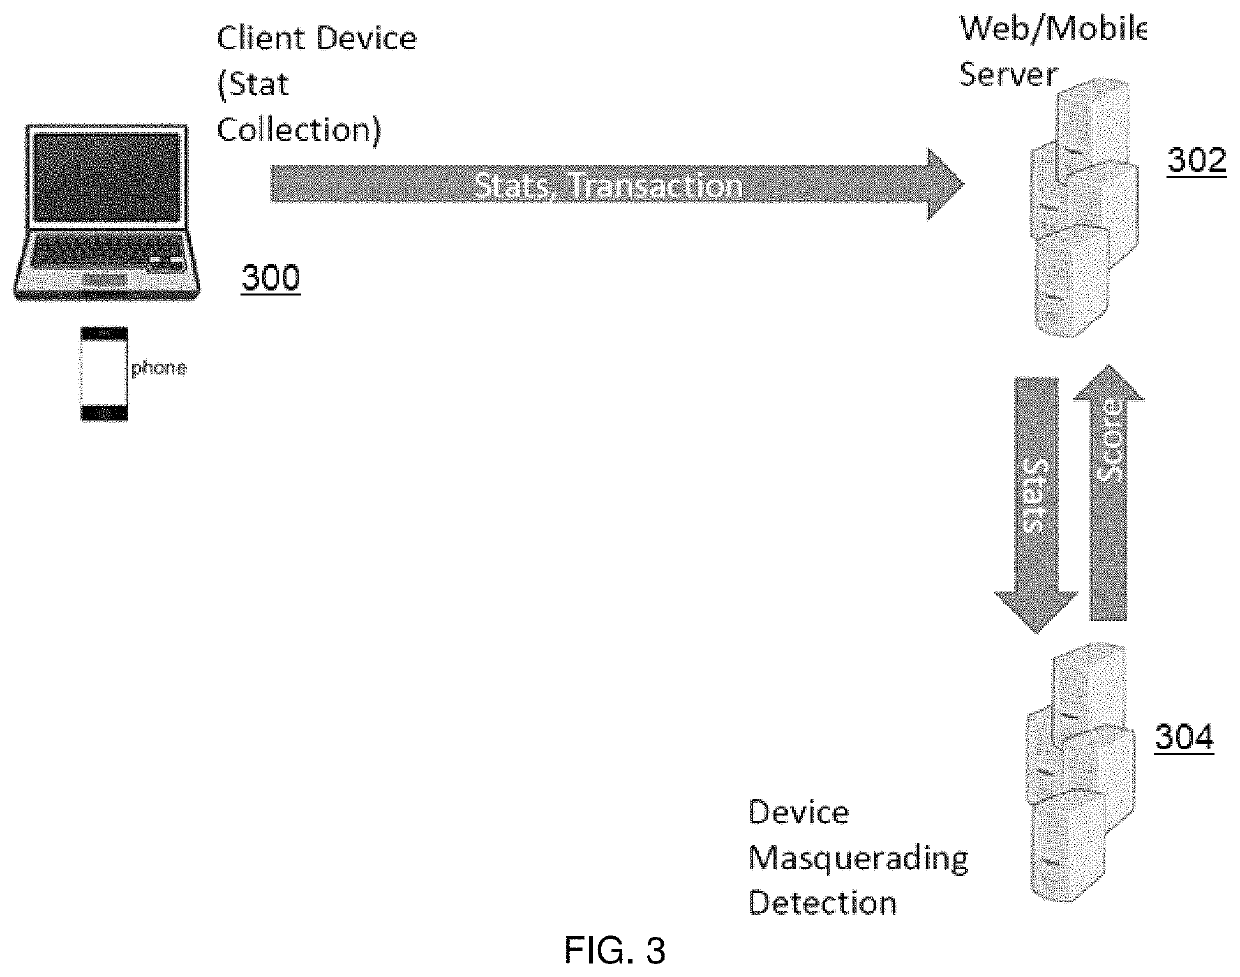 Detecting device masquerading in application programming interface (API) transactions